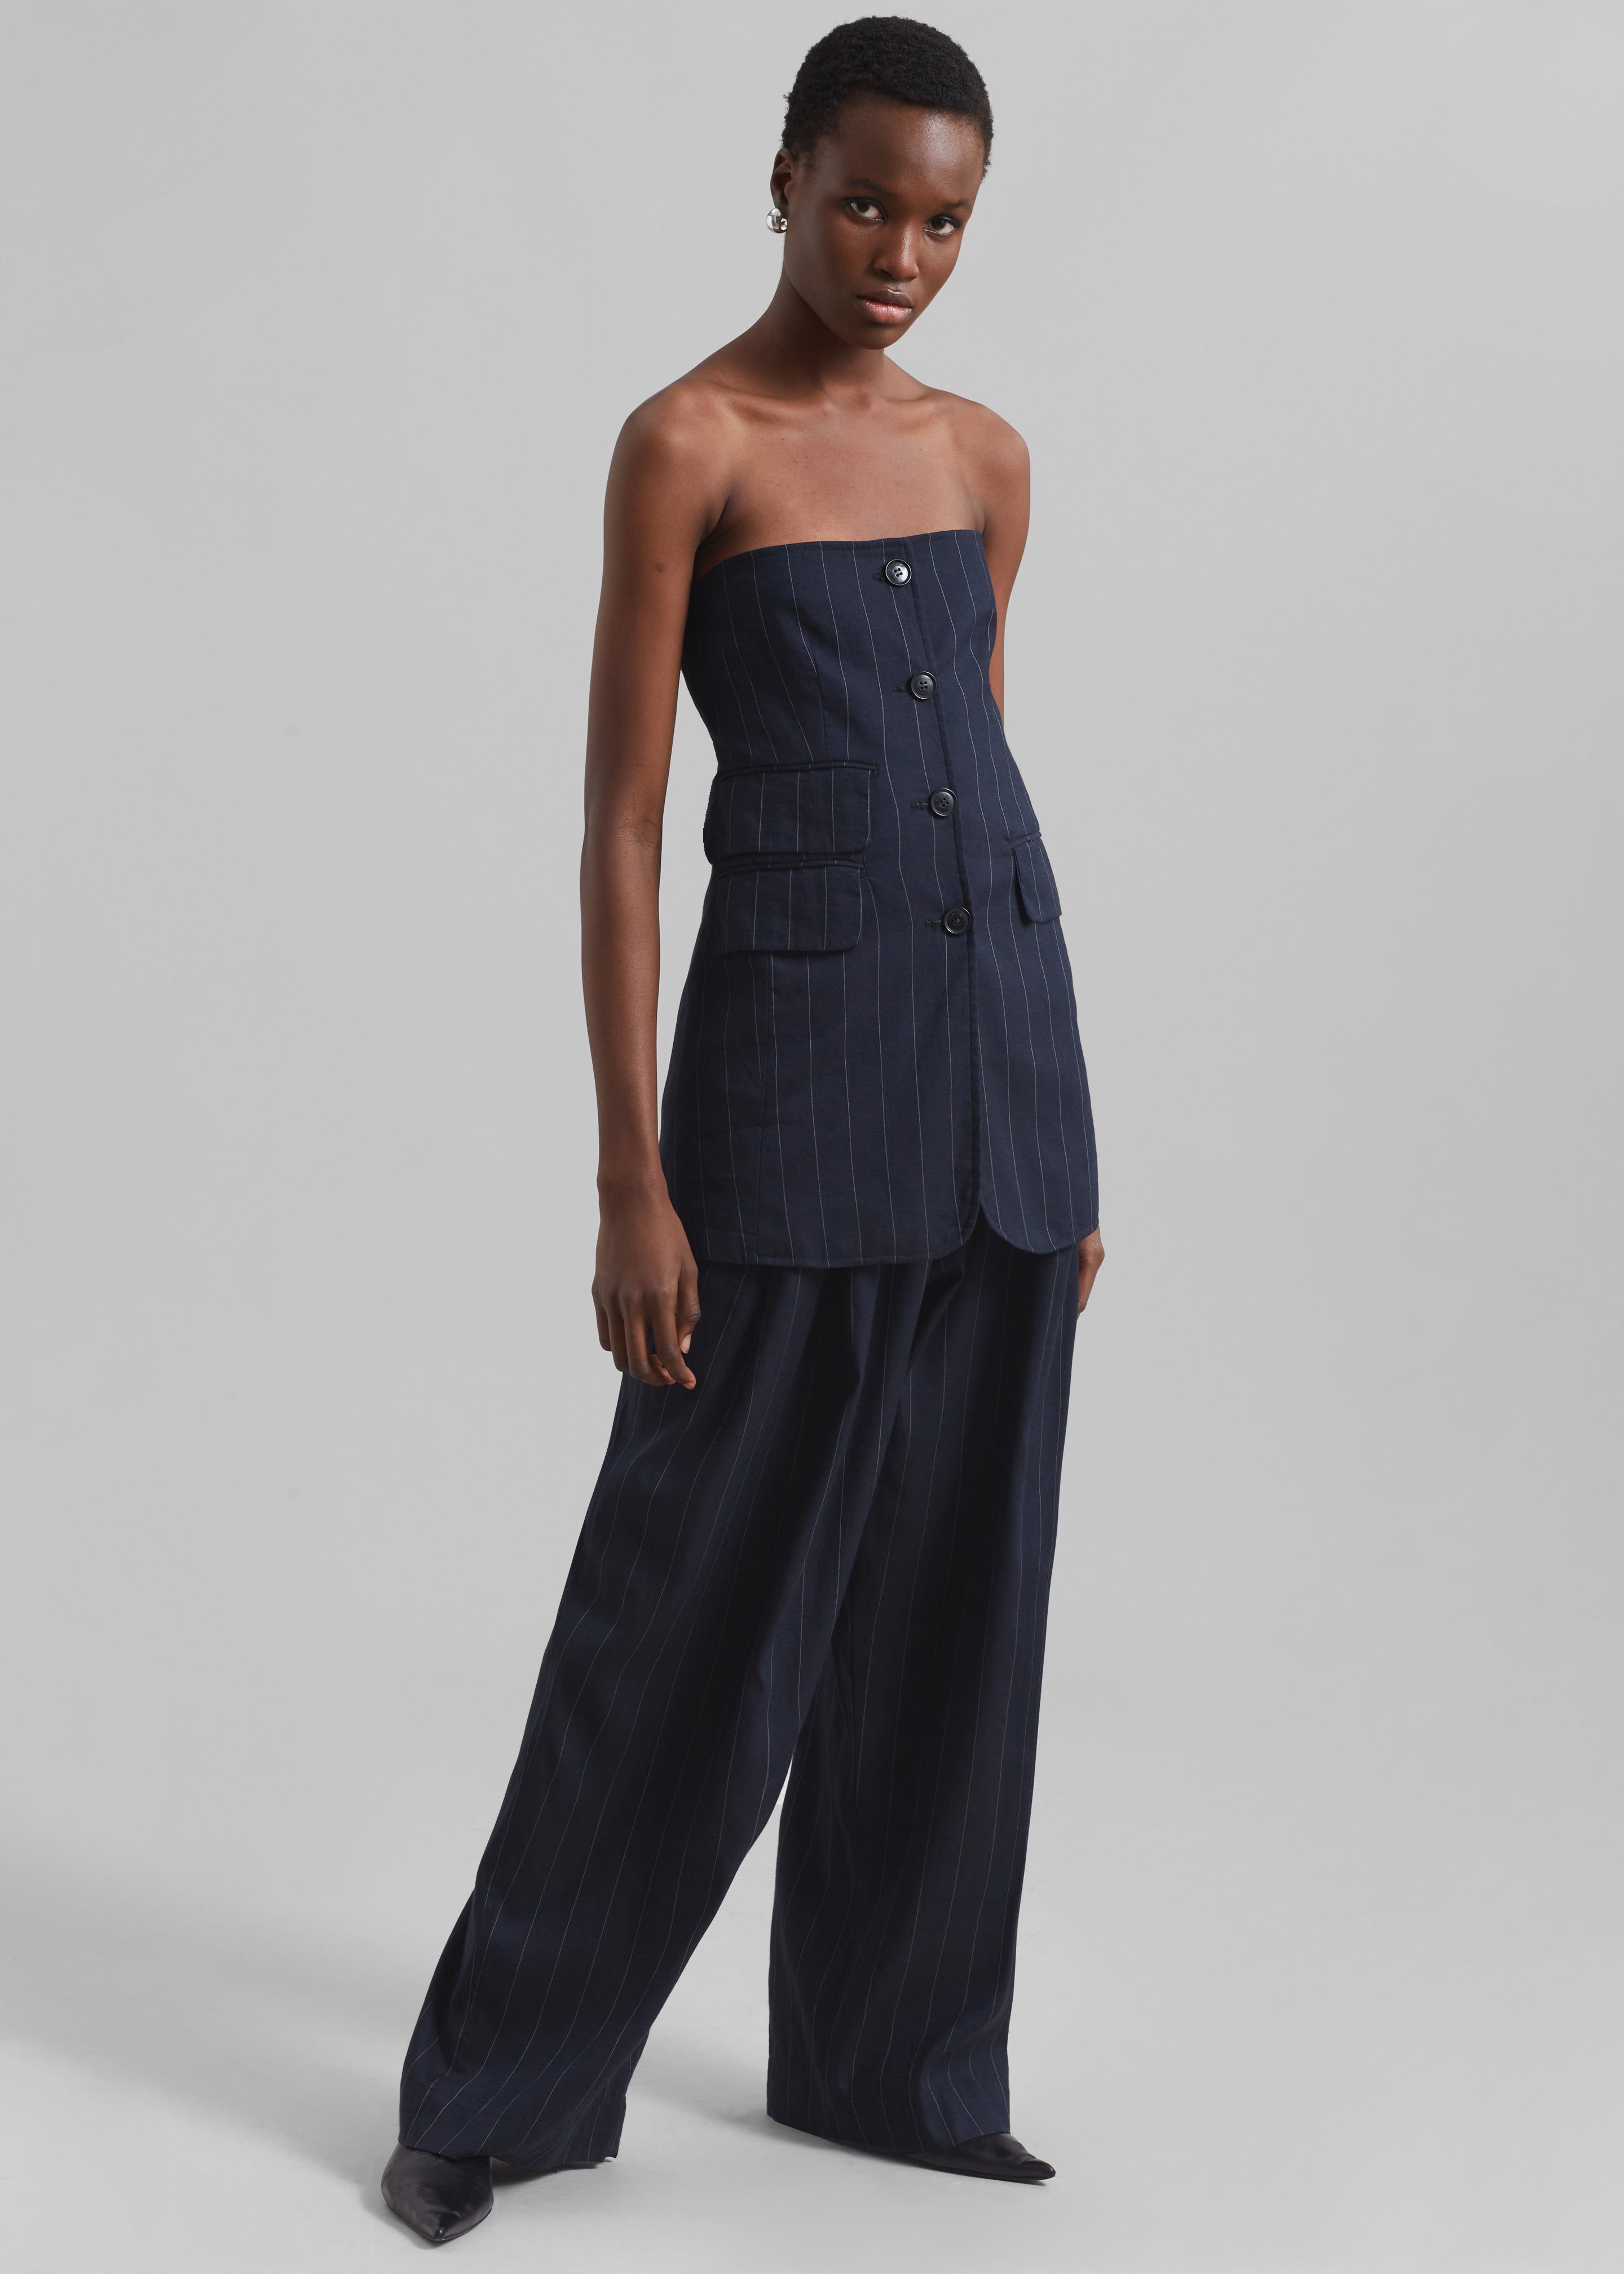 Piper Pleated Trousers - Navy/Beige Pinstripe - 2